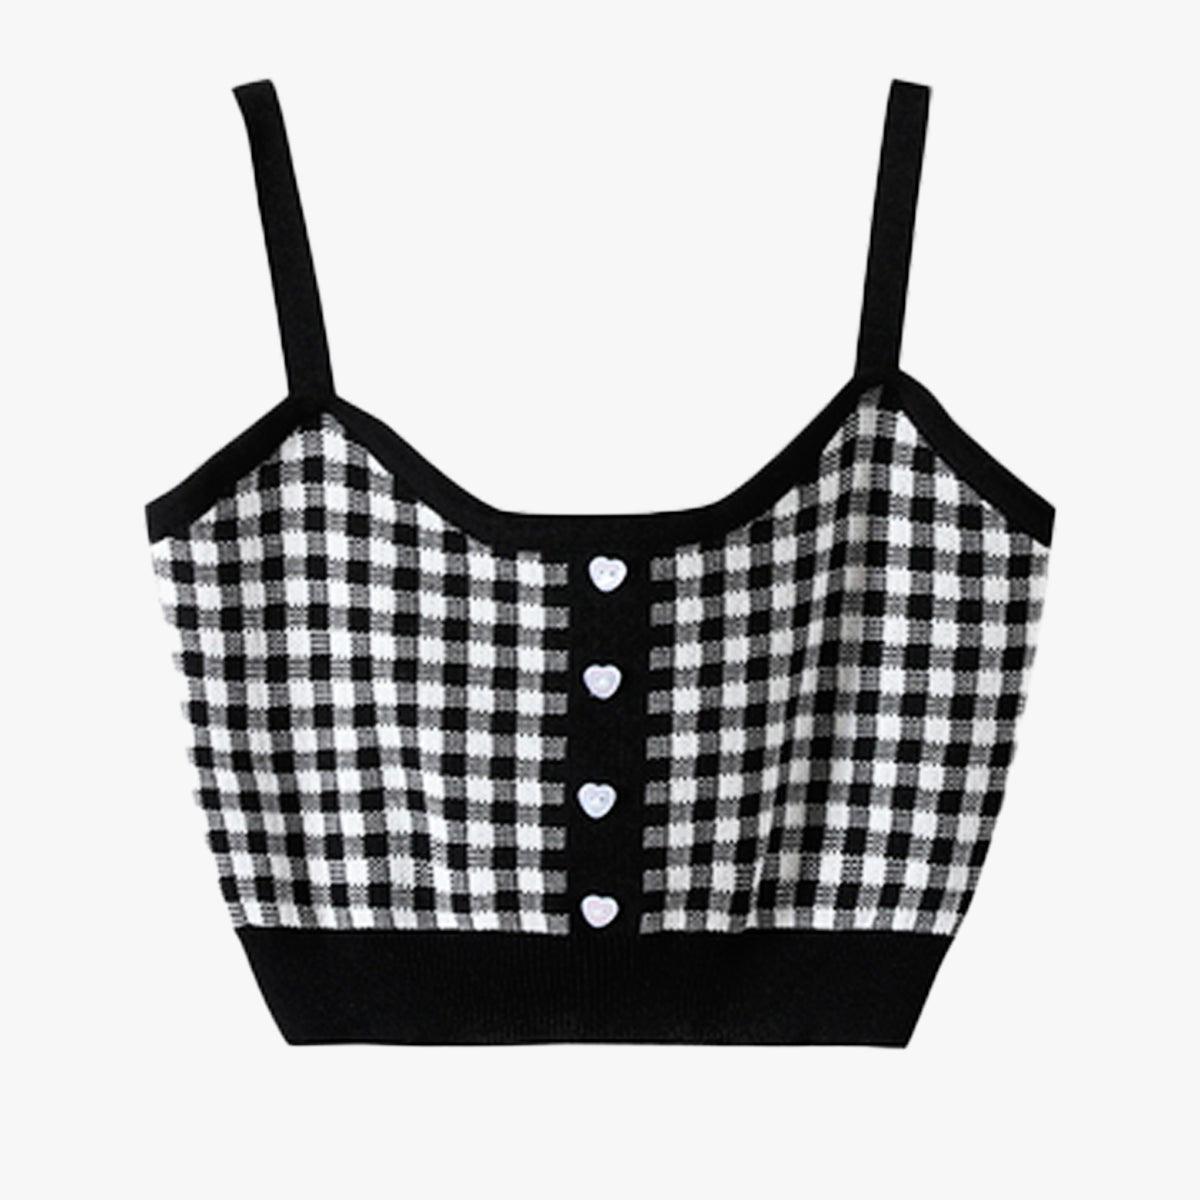 Short Knitted Plaid Crop Top Heart Buttons - Aesthetic Clothes Shop